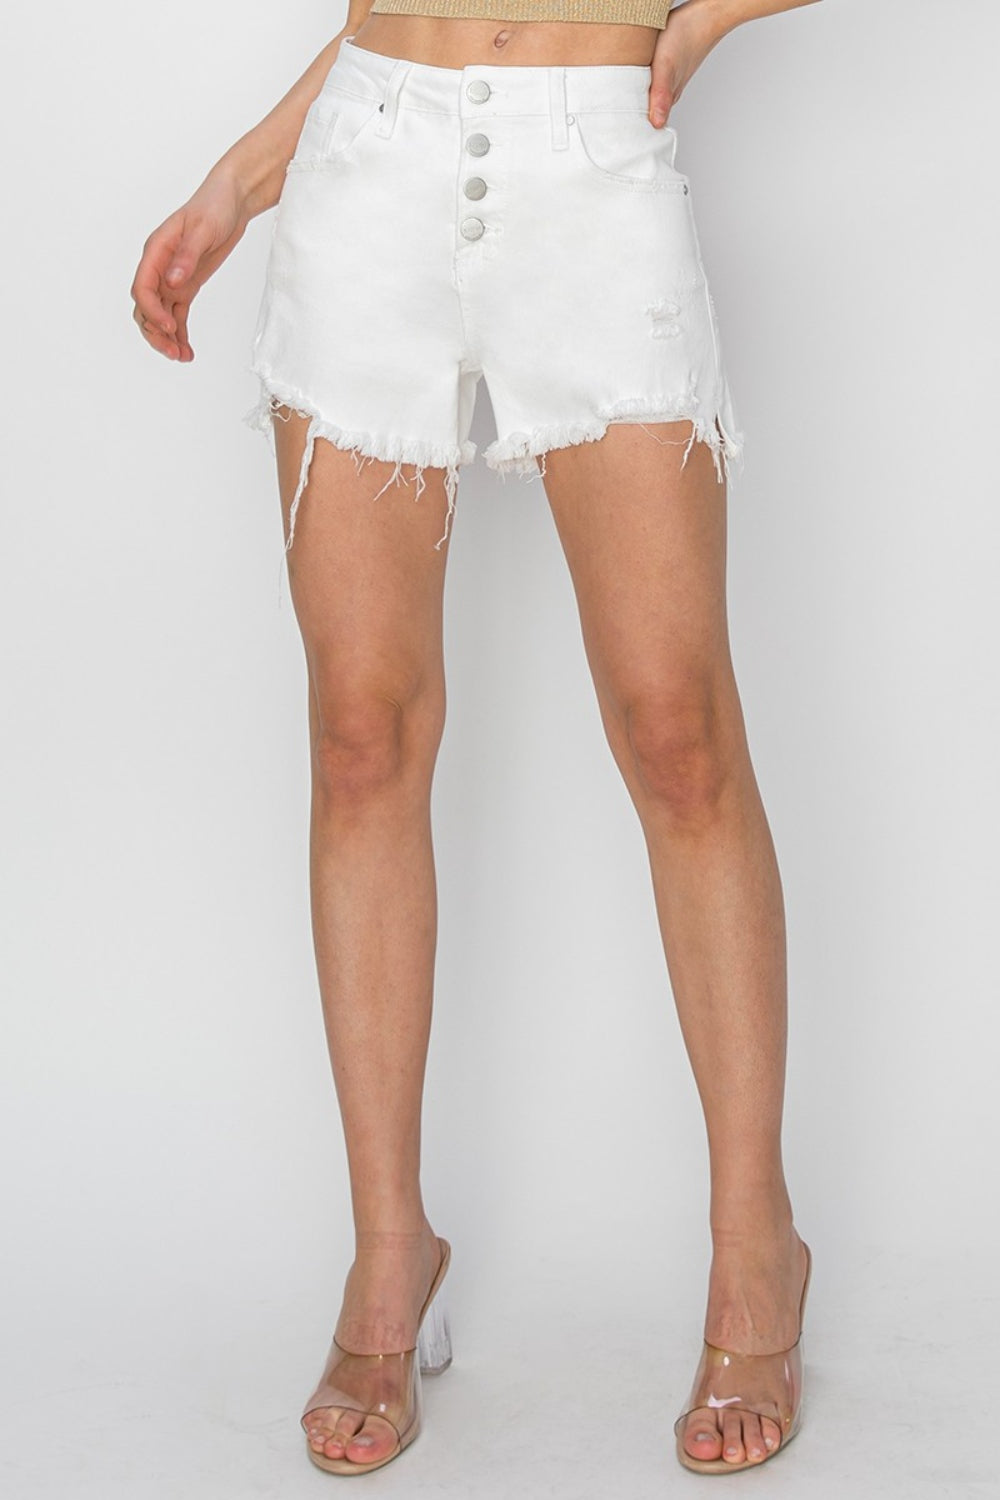 RISEN Button Fly Distressed White Denim Mid-Rise Shorts Frayed Cut-Off Jean